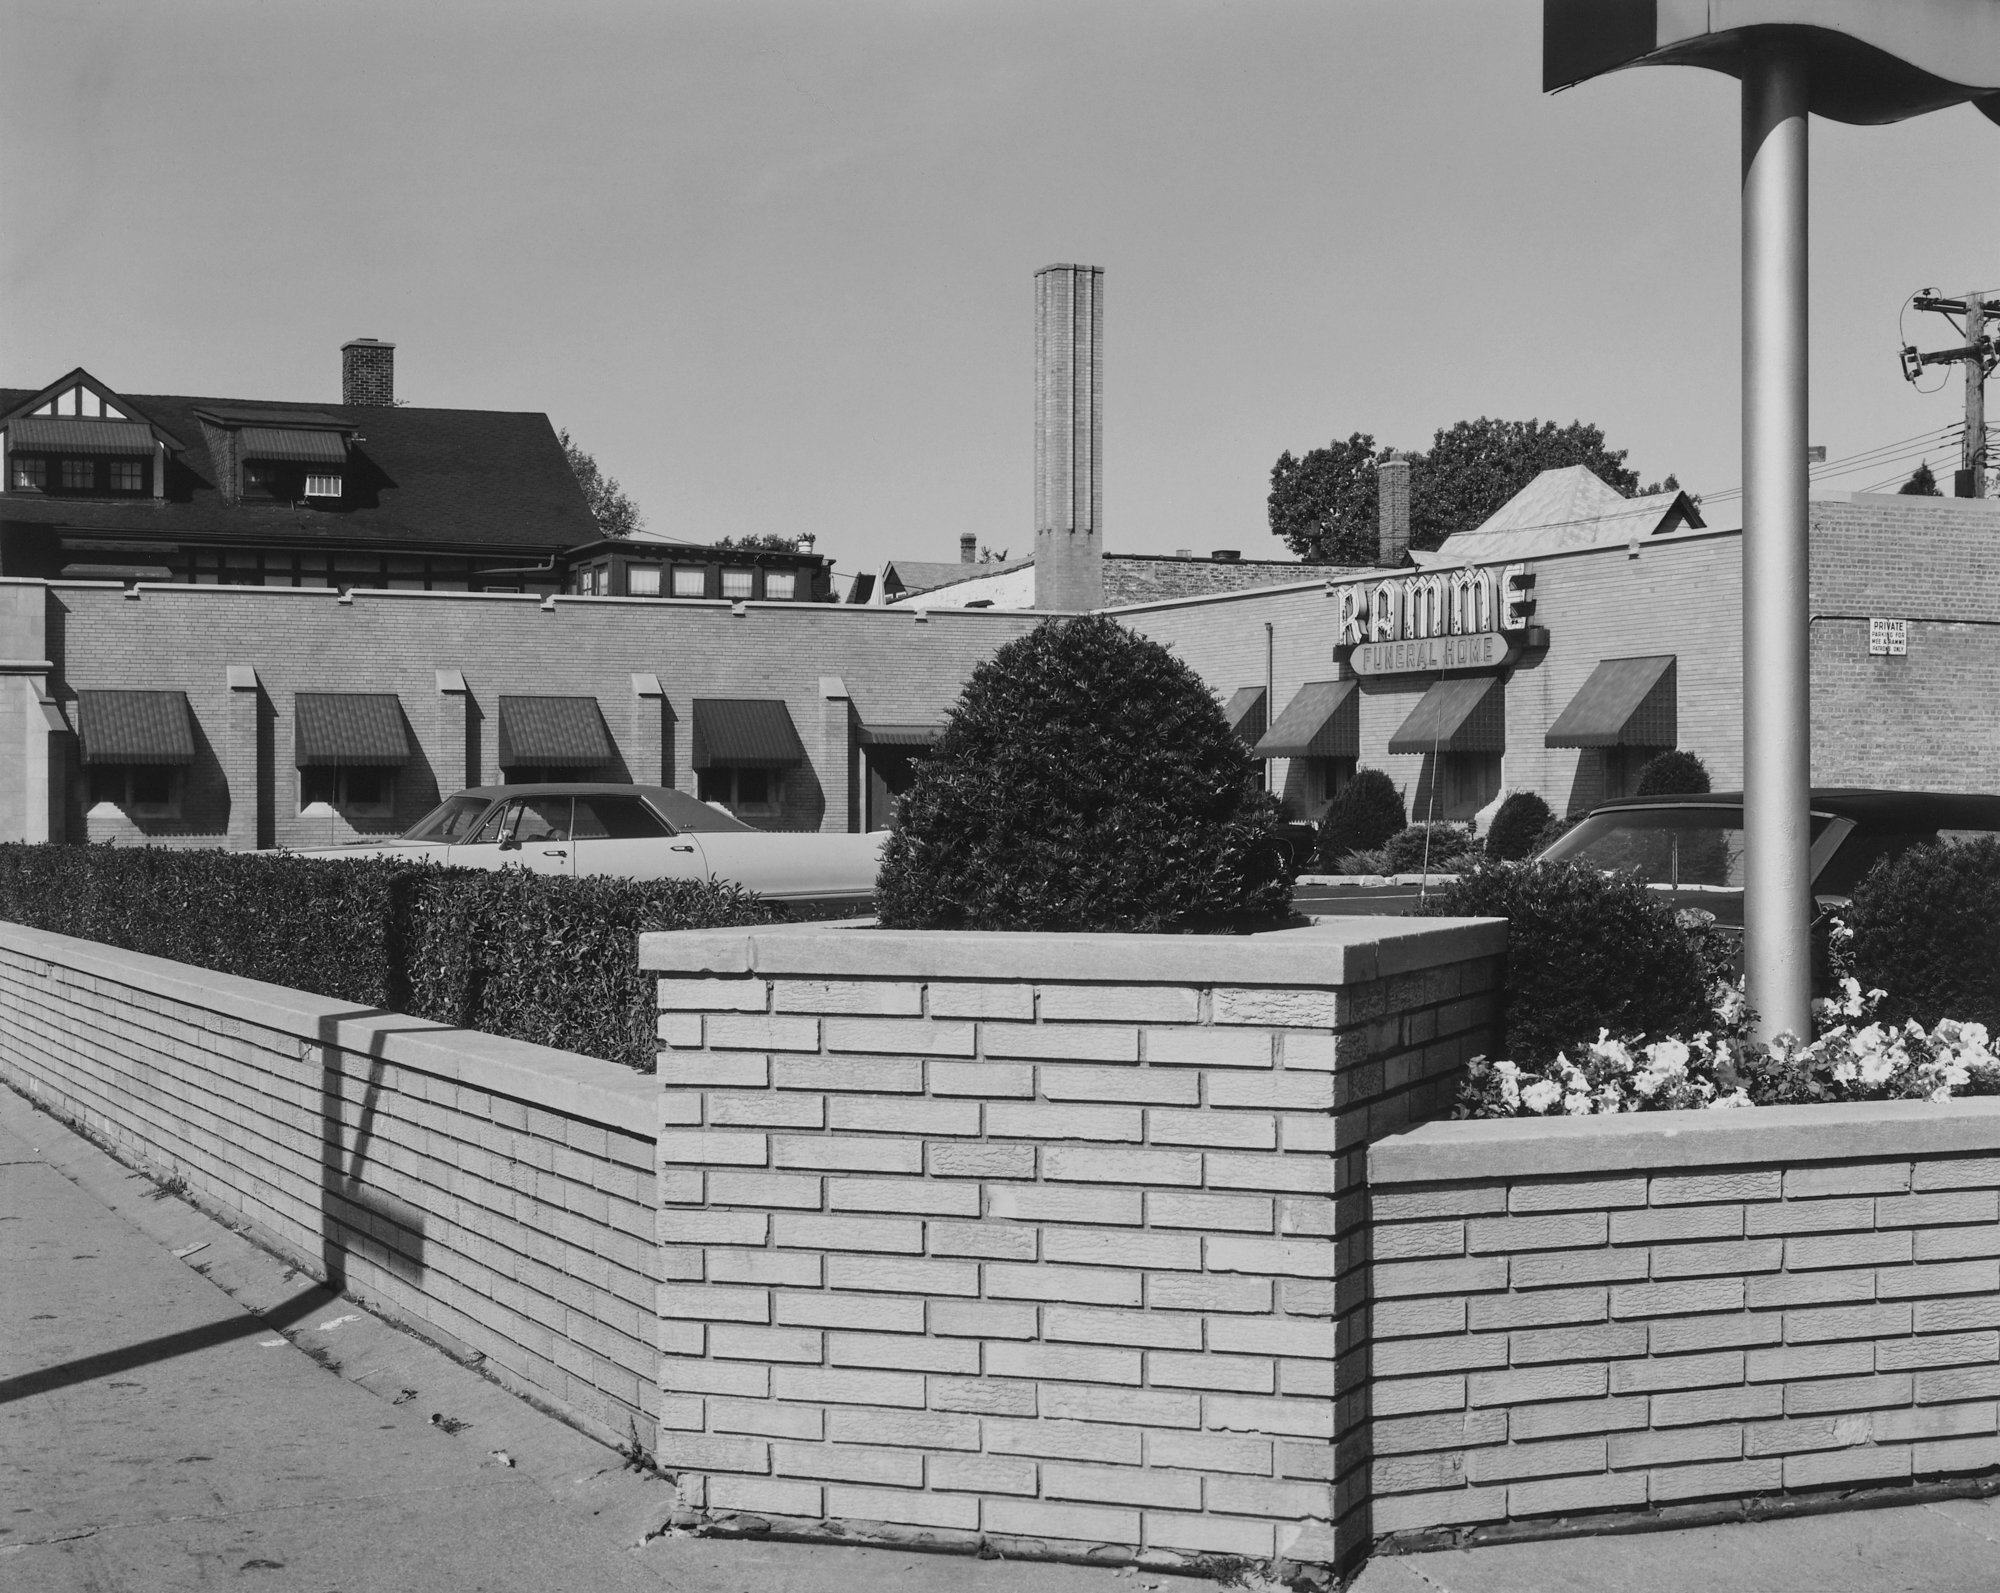 © Nicholas G Merrick 1976, Mee and Ramee Funeral Home, Chicago, Illinois.jpeg